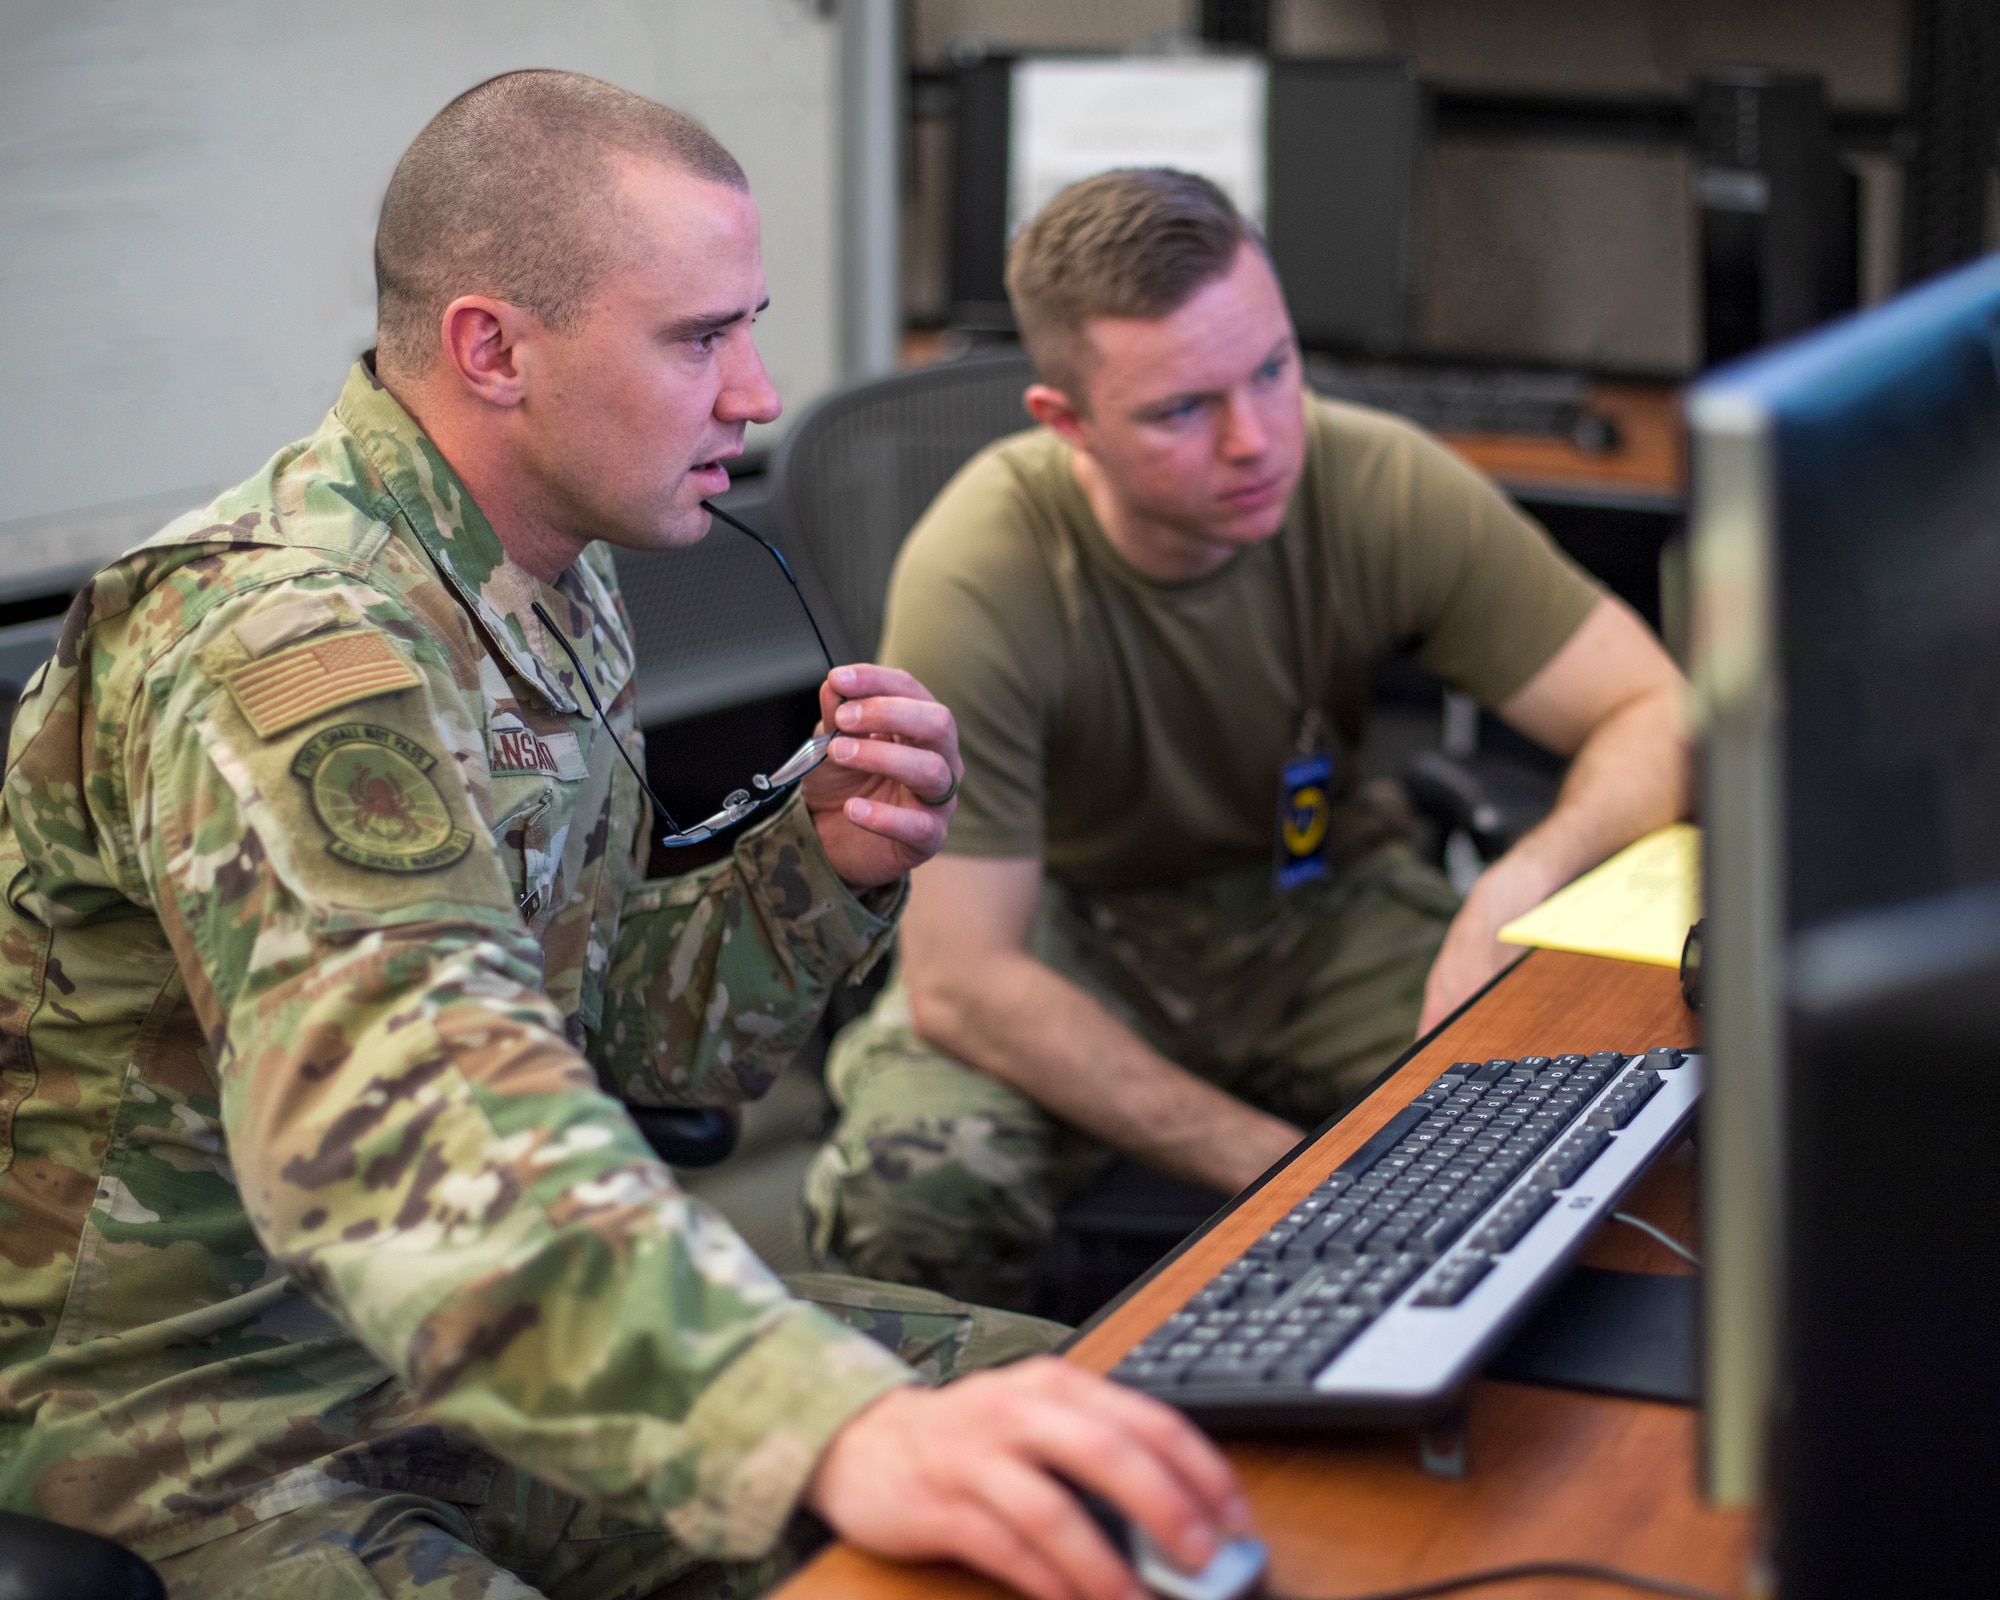 U.S. service members work together during SPACE FLAG 23-2 at Schriever Space Force Base, Colorado, April 27, 2023. SPACE FLAG 23-2 was the largest exercise iteration to date, involving 250 participants. It was also the most complex integration of cyber warfare, the largest integration of coalition partners ever at a SPACE FLAG exercise, and the first SPACE FLAG exercise to feature live-fire space electronic warfare. (U.S. Space Force photo by Judi Tomich)